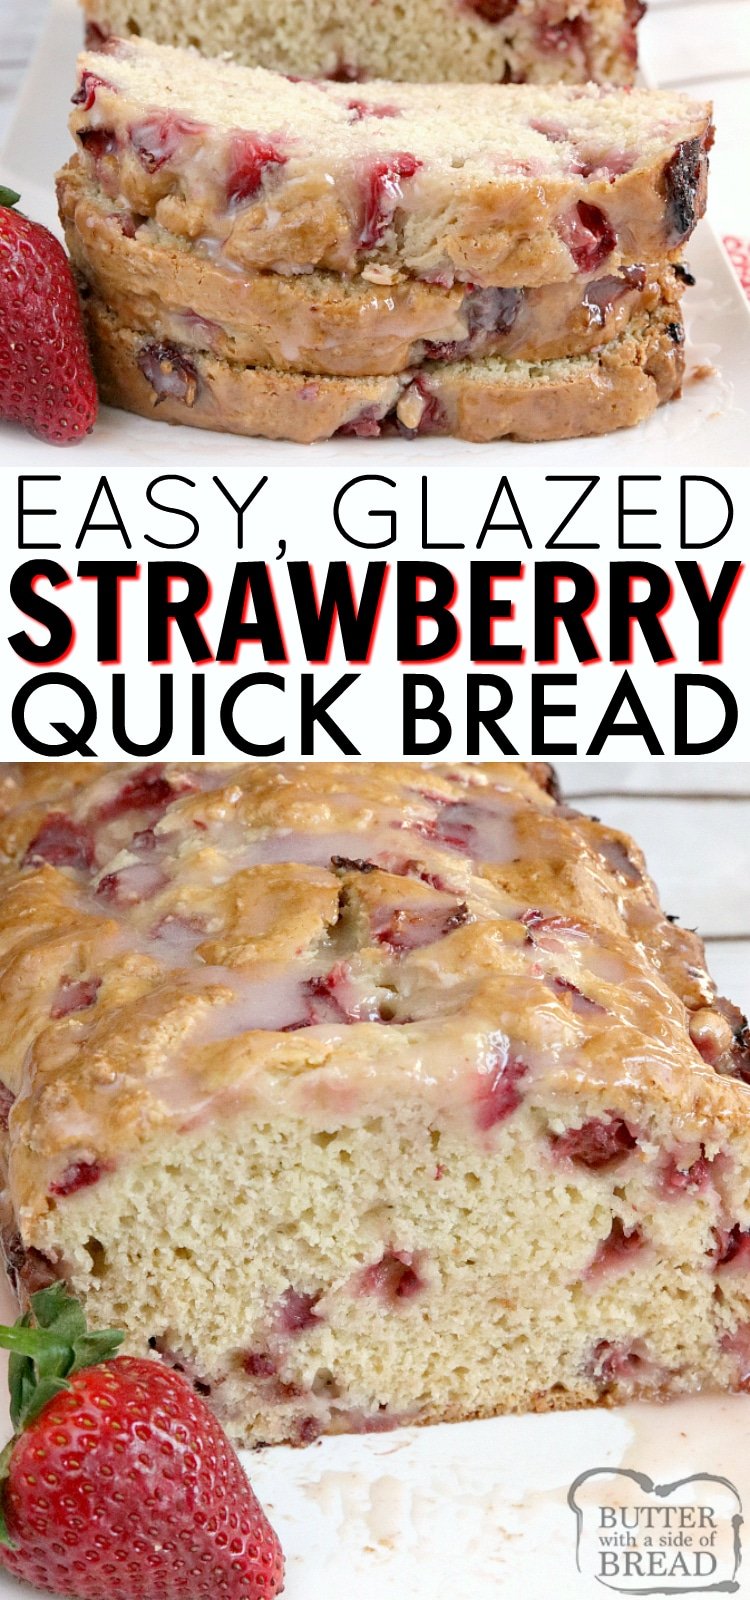 Glazed Strawberry Bread is an easy quick bread that is moist, sweet, full of fresh strawberries, and then topped with a simple strawberry glaze. This easy bread recipe is simple to make and absolutely delicious!